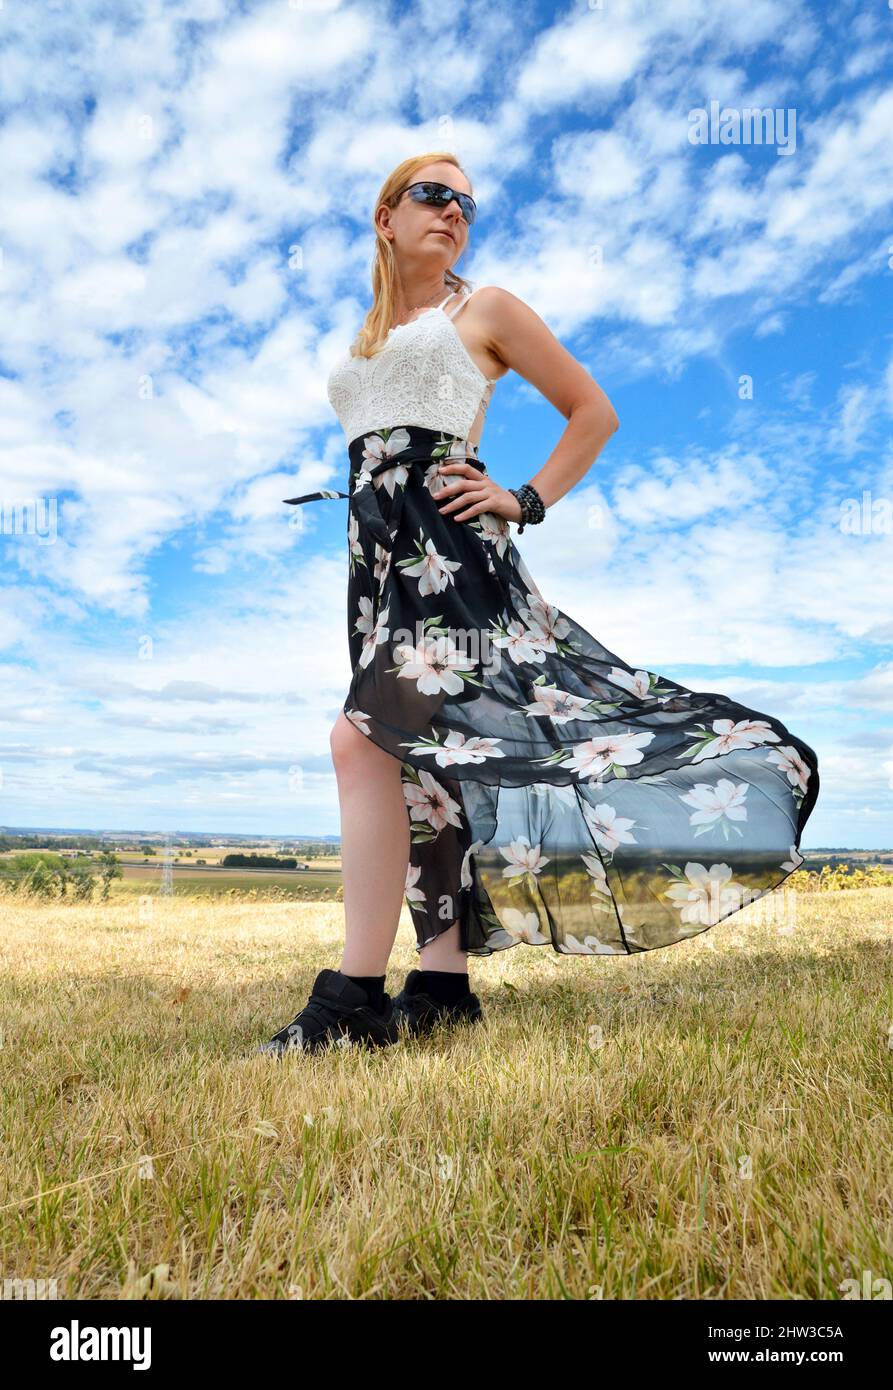 A beautiful blonde woman with a dress with flowers flying in the wind during spring Stock Photo